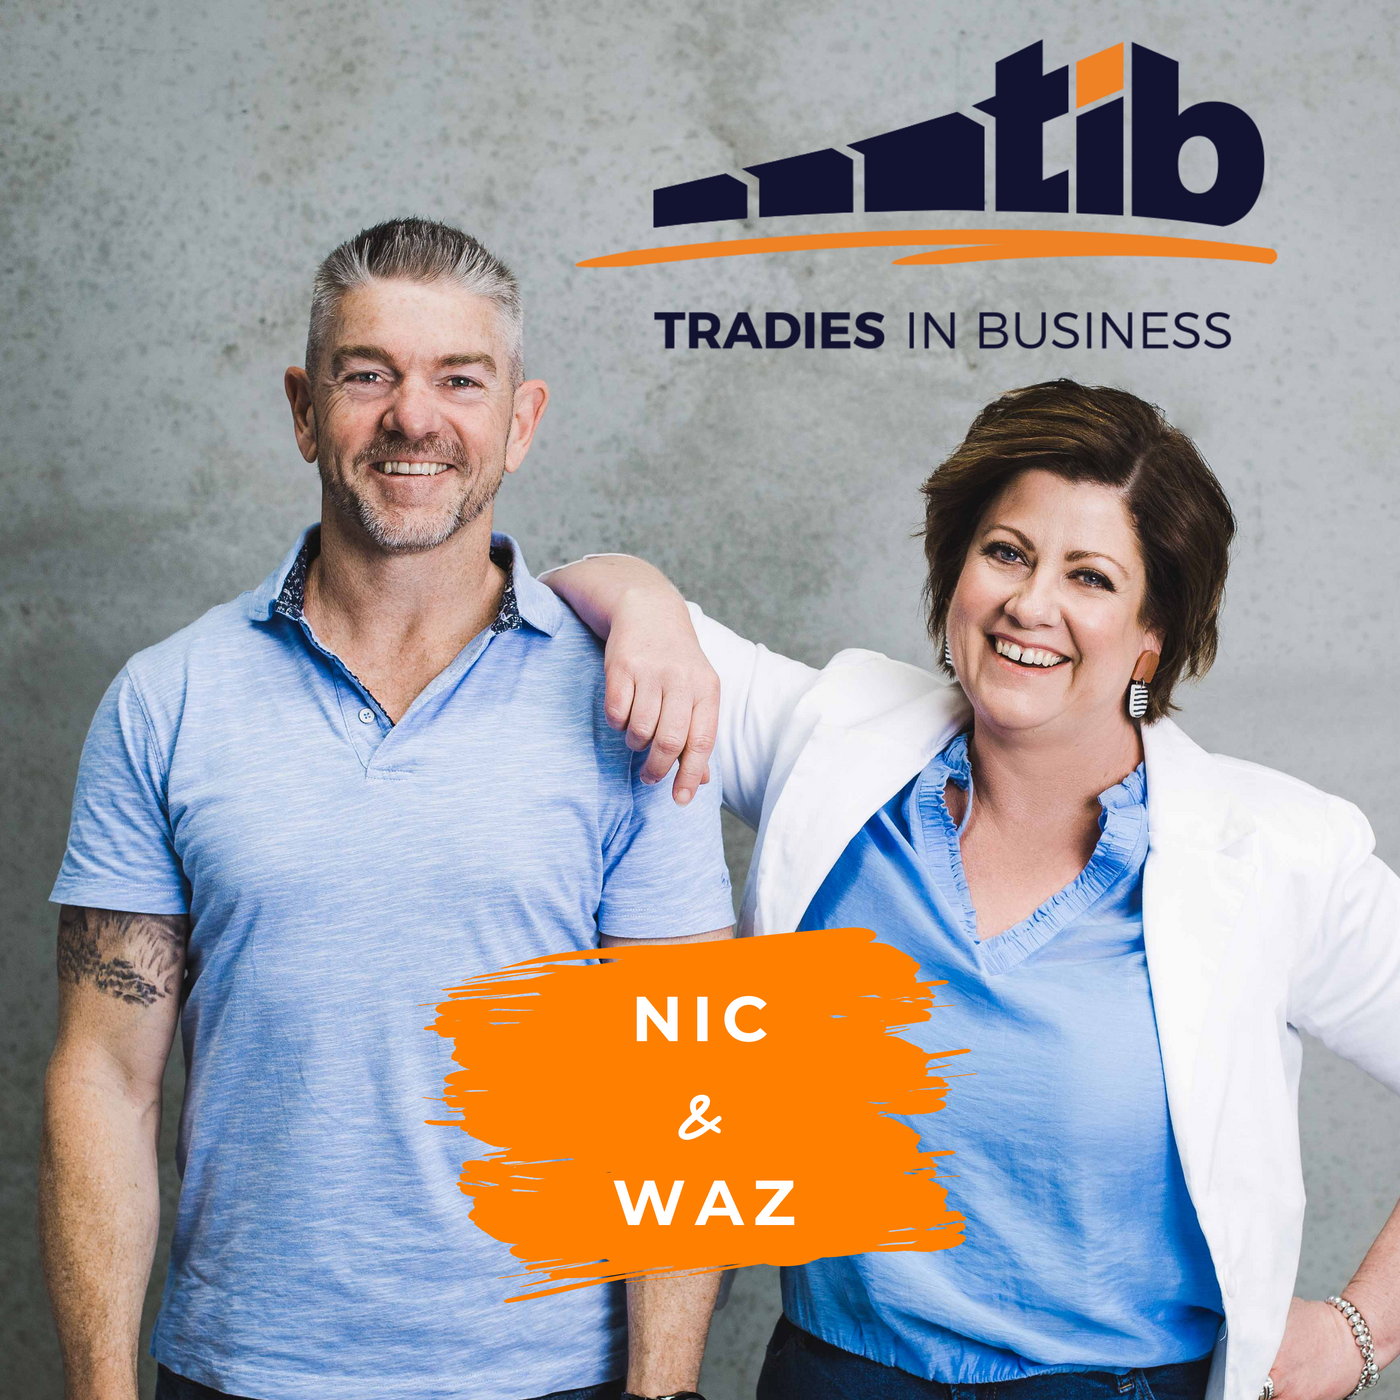 TIB639 Real Tradie Stories - Scott Wrigley from ACT Certification